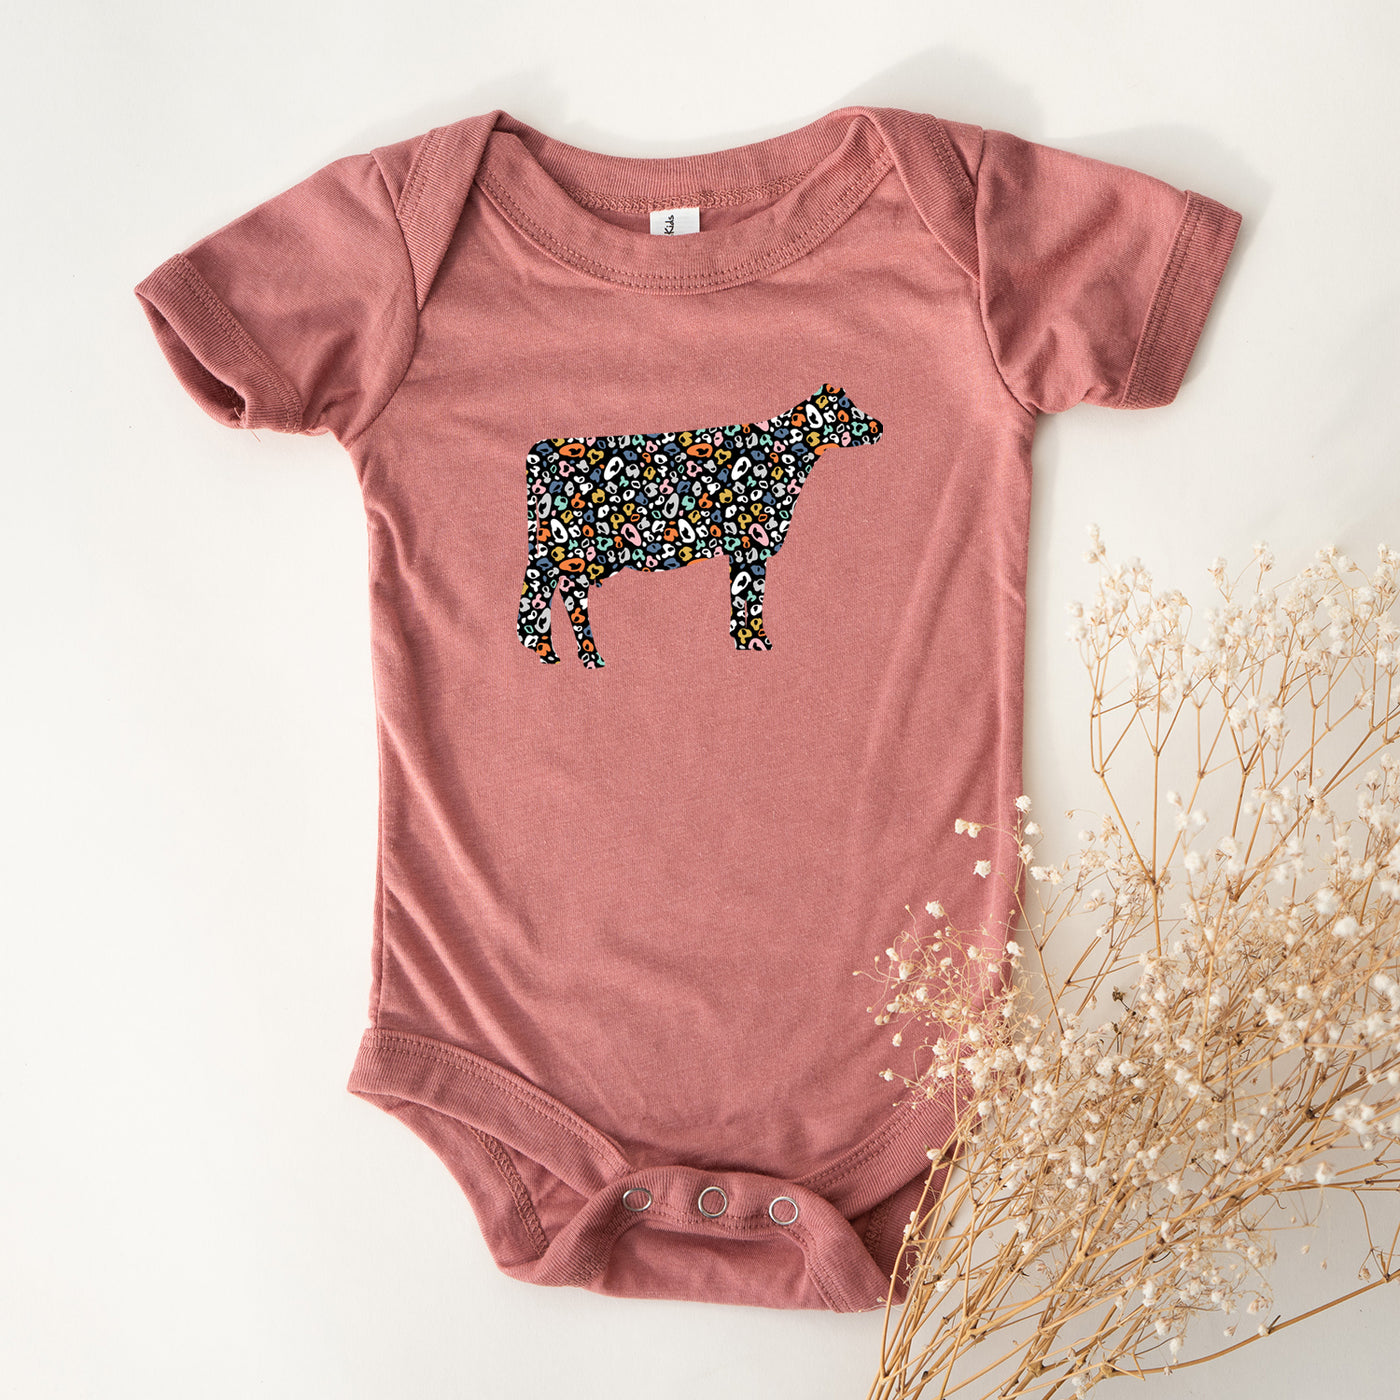 Colorful Cheetah Dairy Cow One Piece/T-Shirt (Newborn - Youth XL) - Multiple Colors!